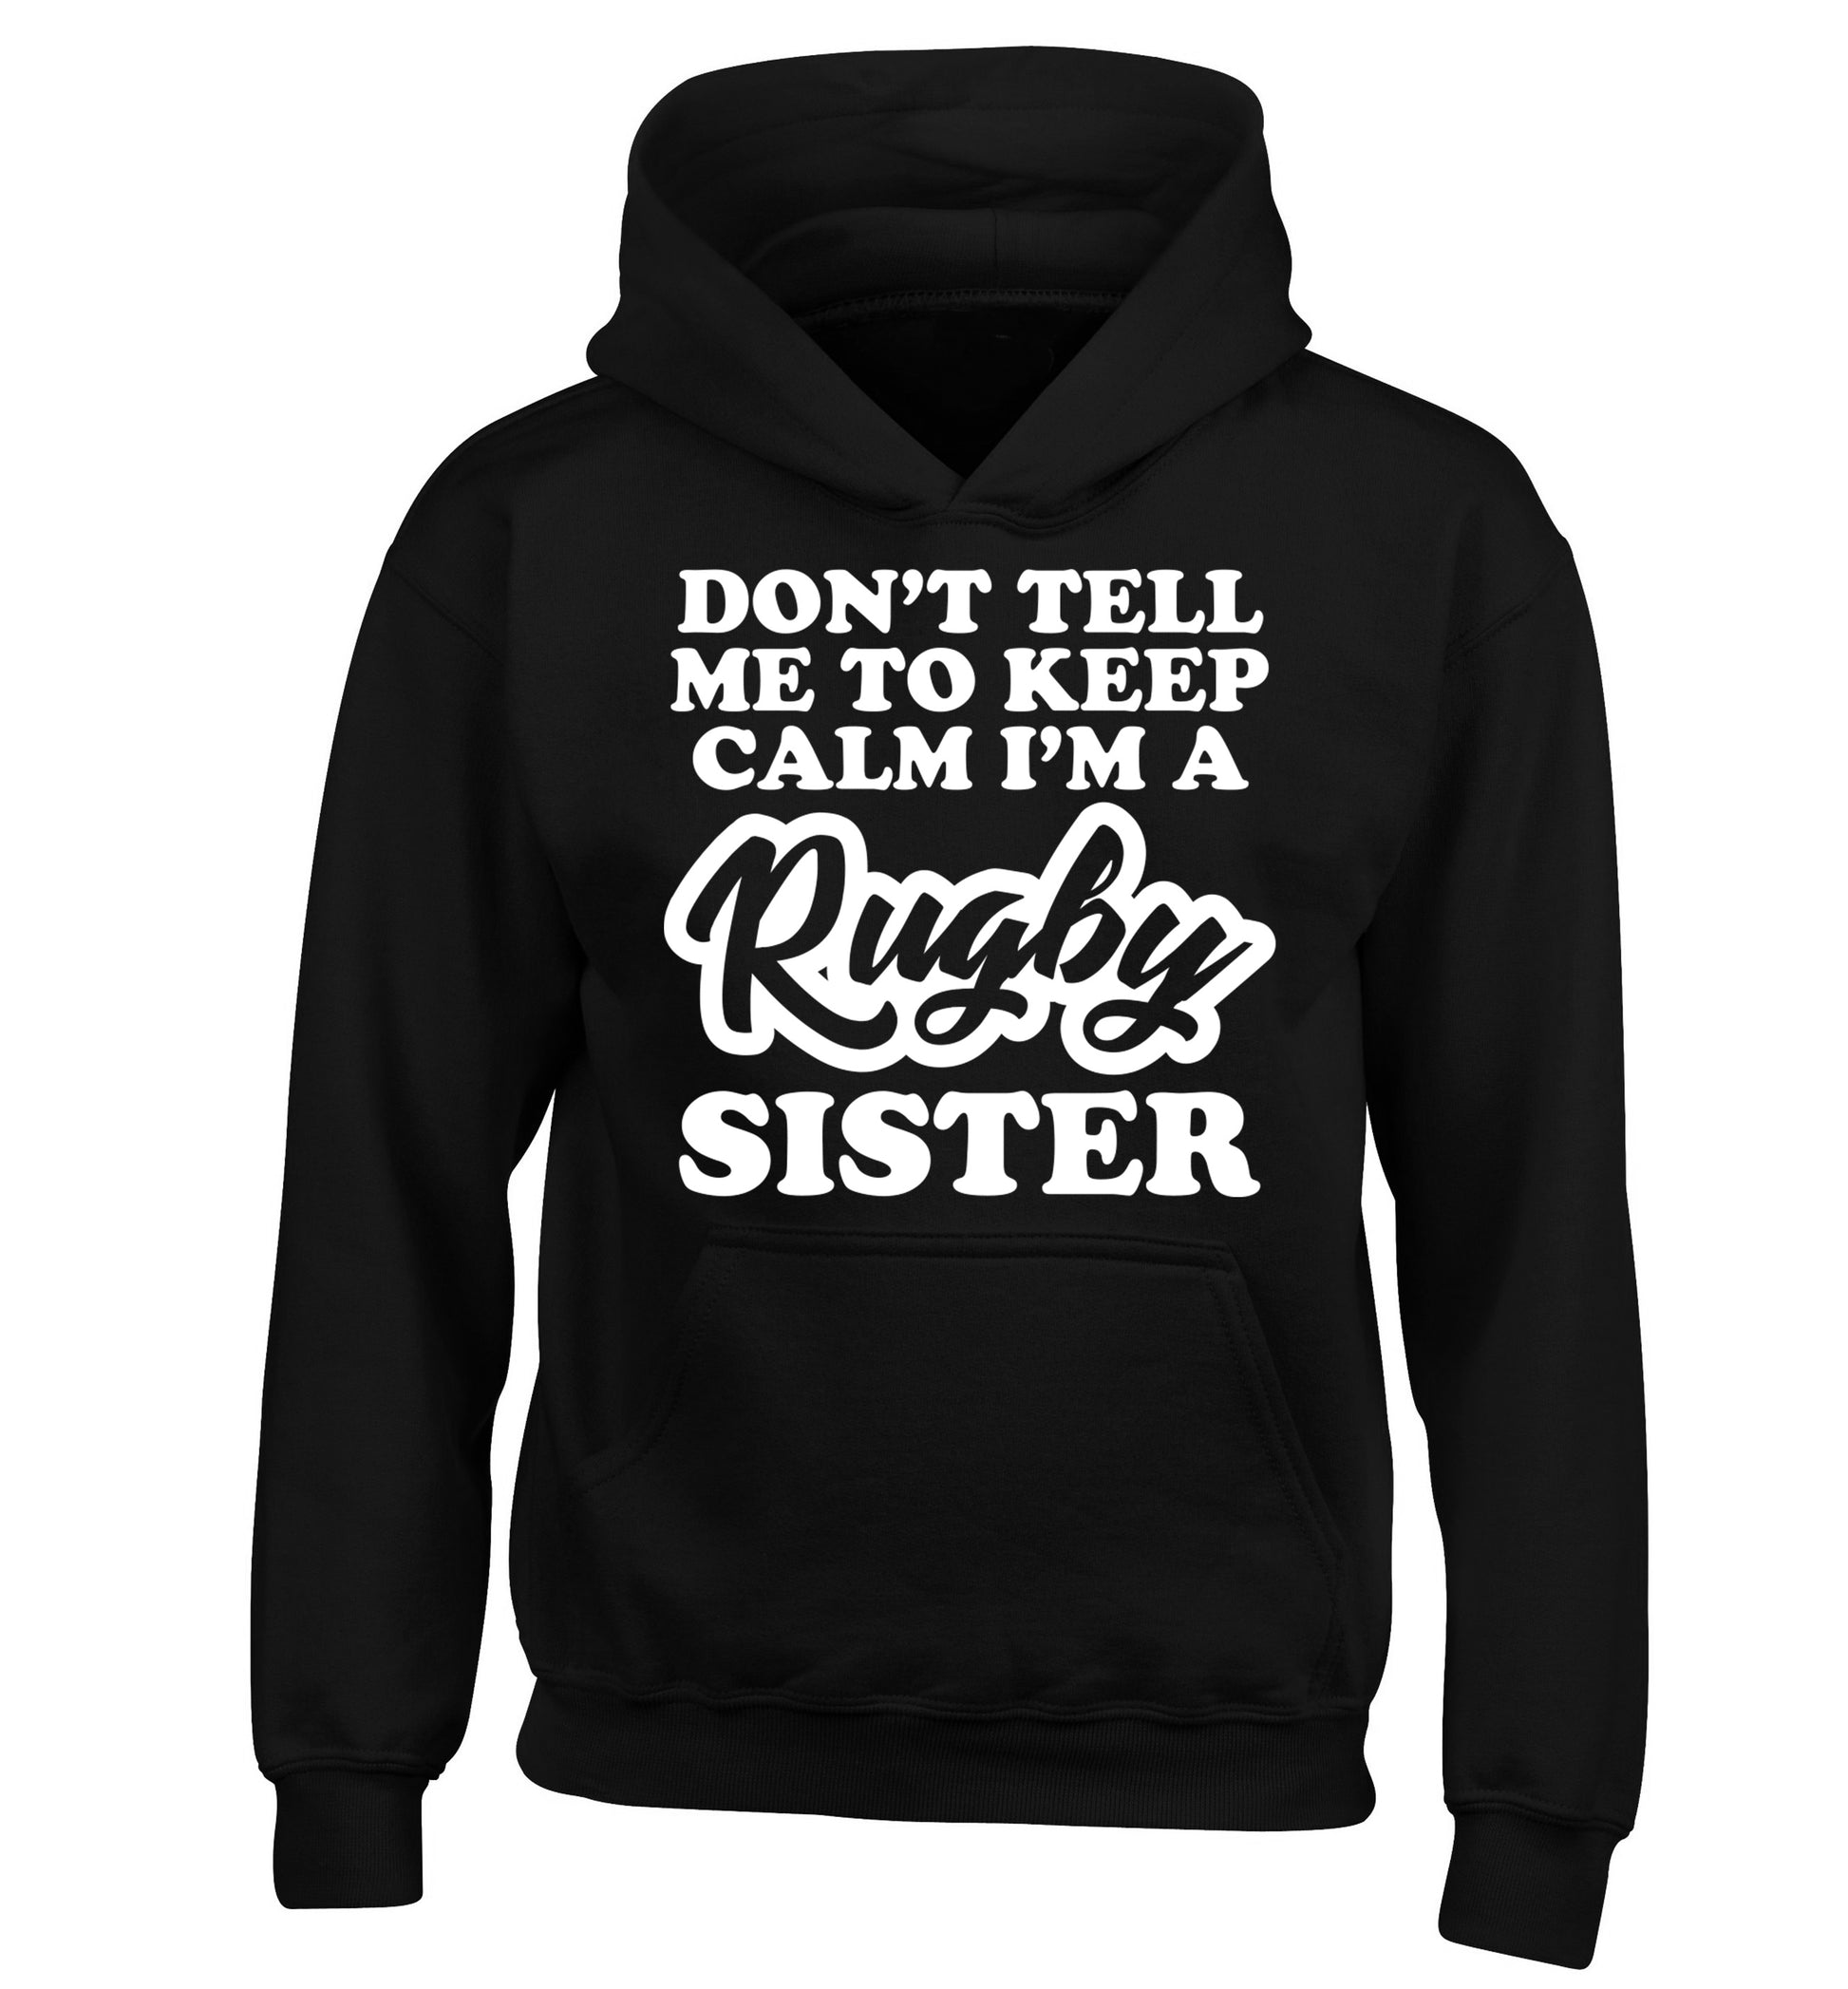 Don't tell me keep calm I'm a rugby sister children's black hoodie 12-13 Years